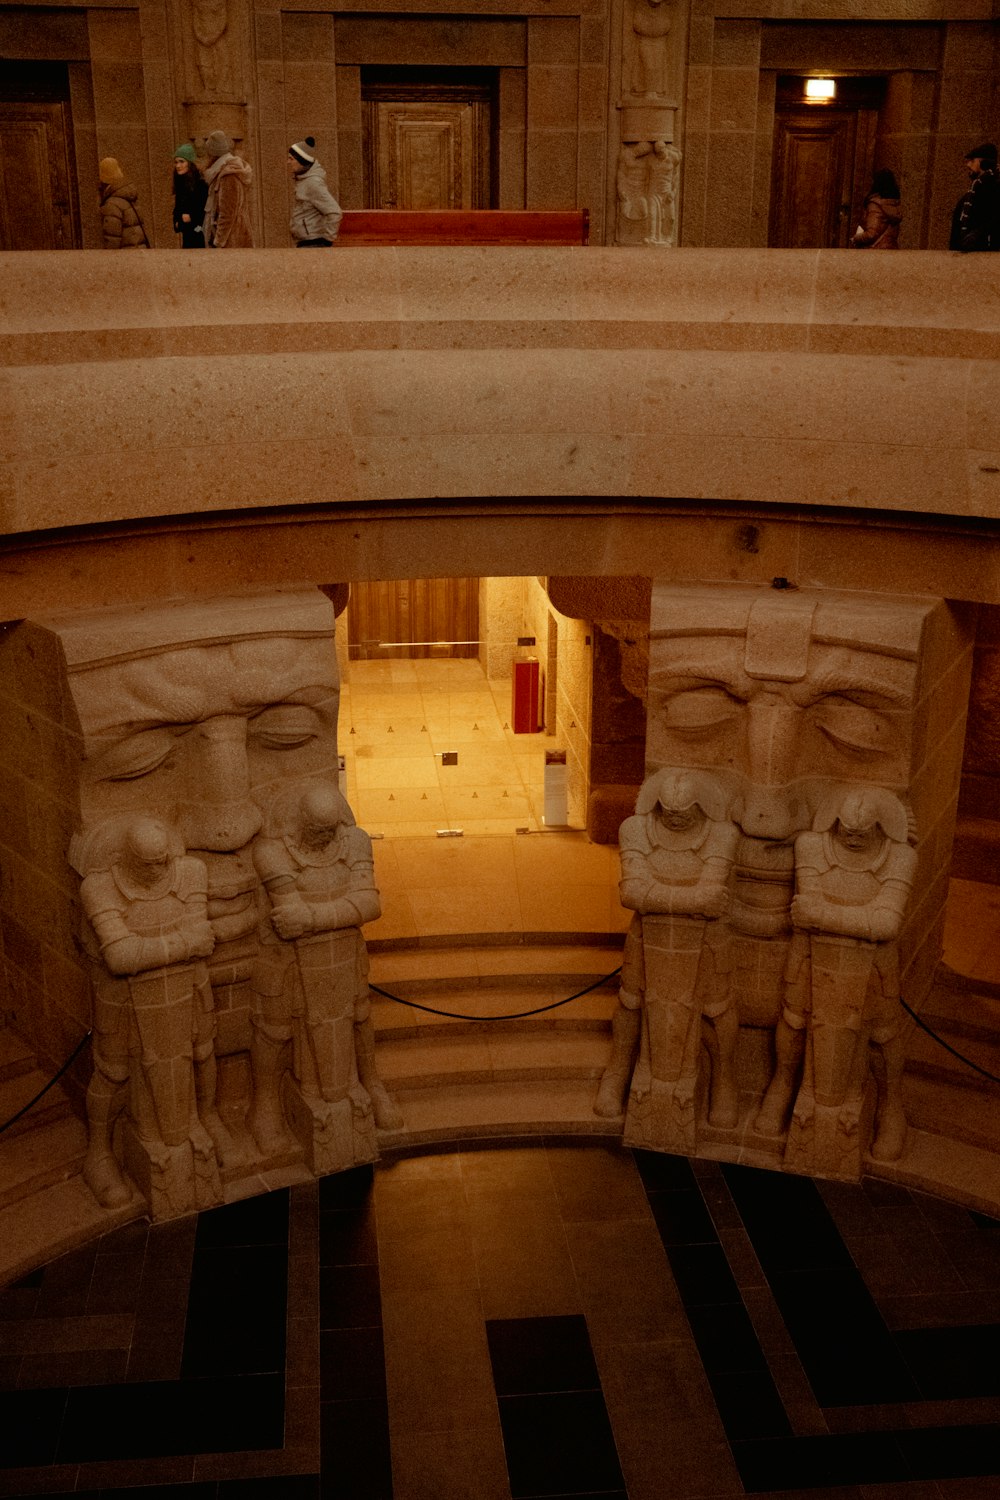 a group of statues in a building